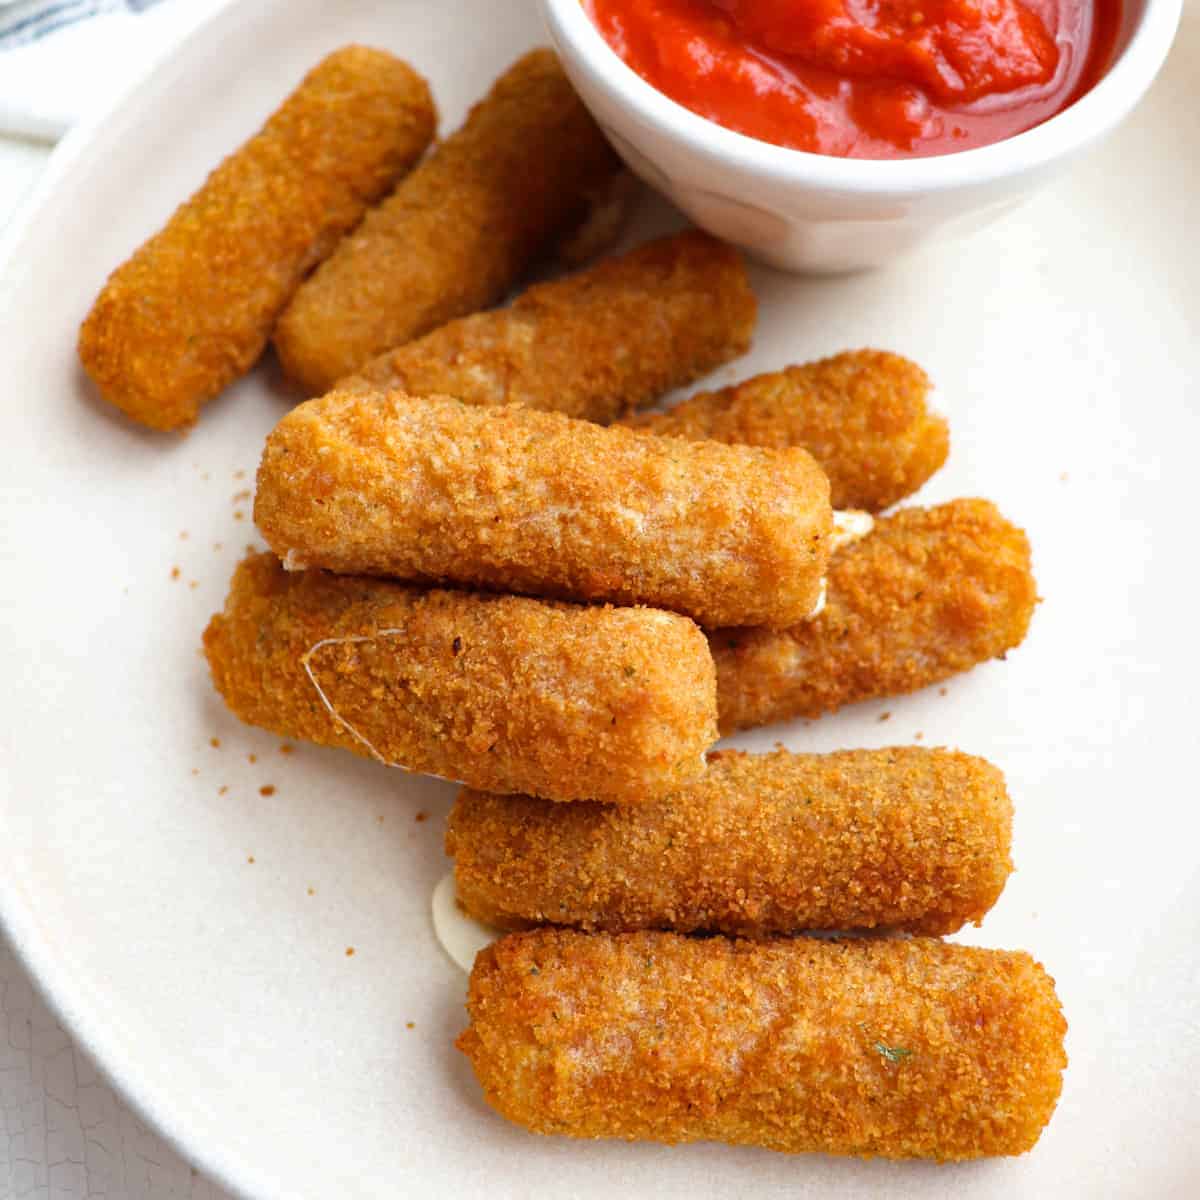 a pile of mozzarella sticks on a plate with a cup of marinara sauce